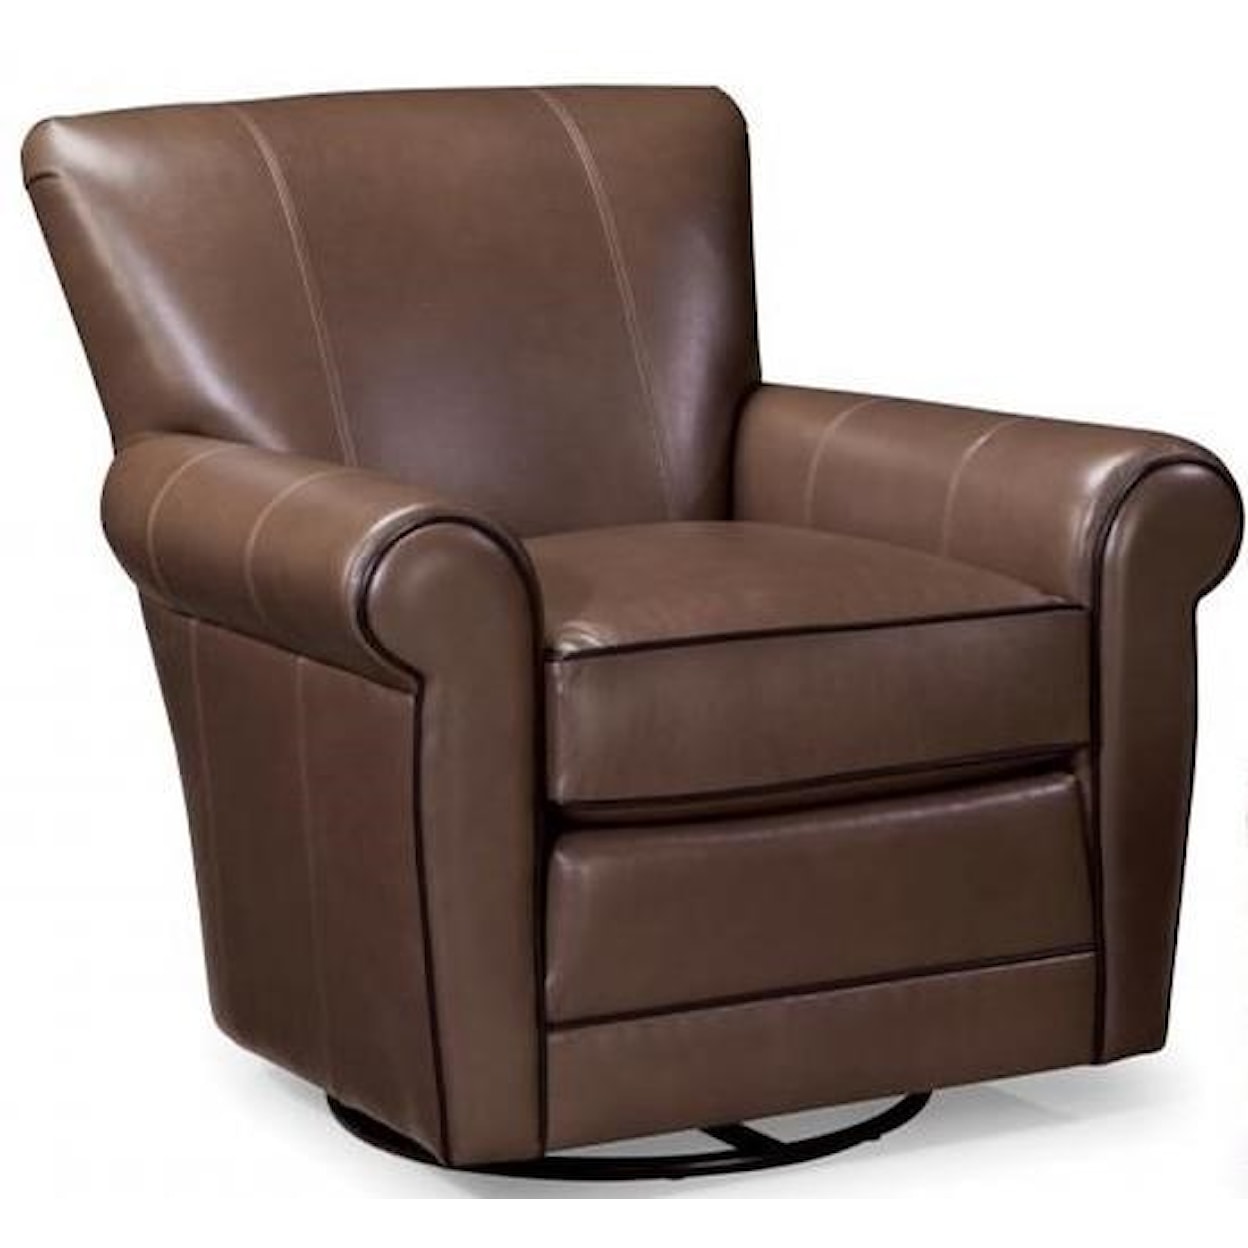 Smith Brothers Smith Brothers Swivel Glider Chair